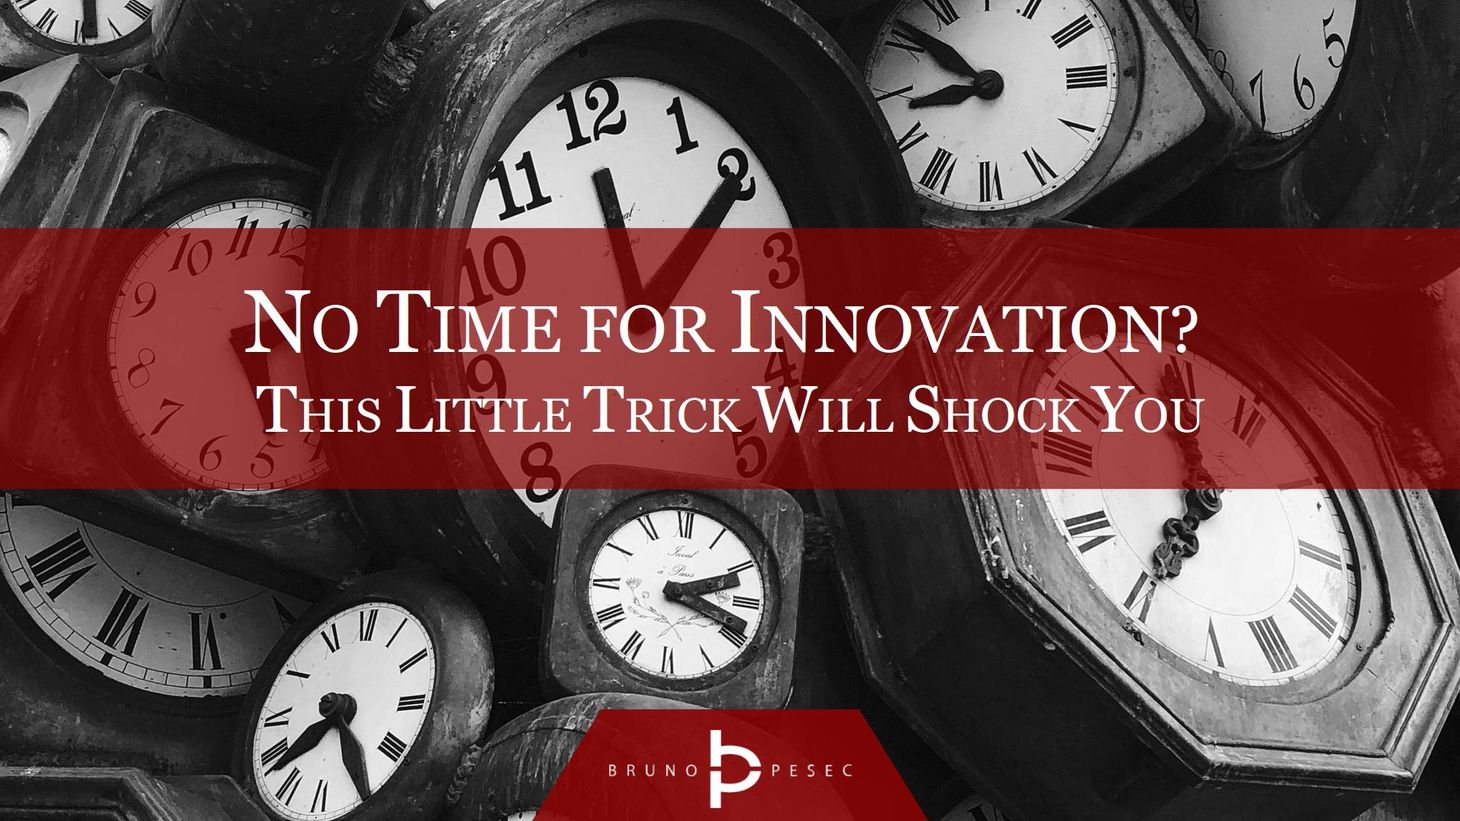 No time for innovation? This little trick will shock you